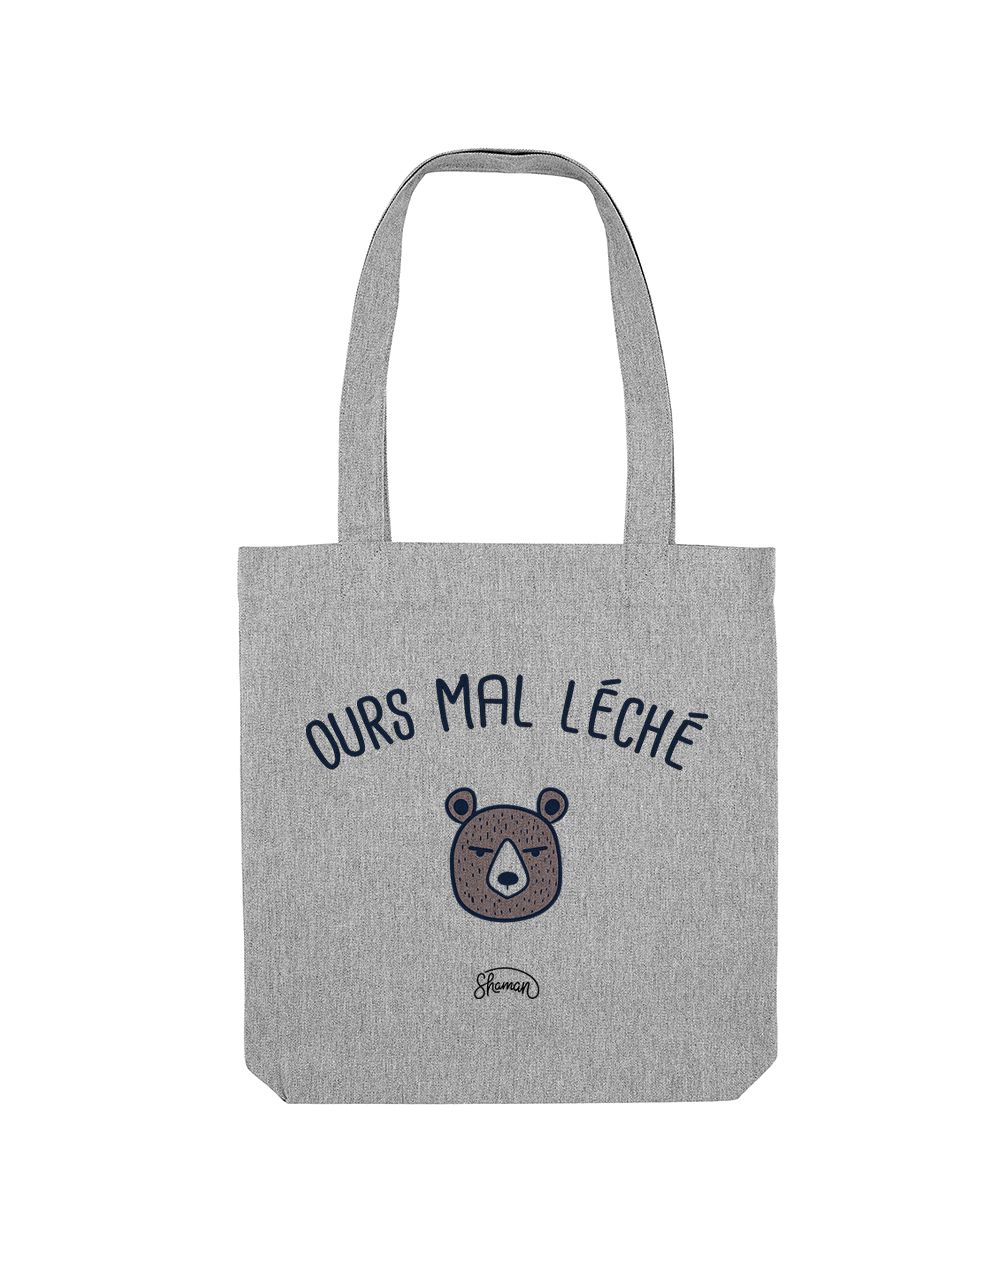 Tote Bag "Ours mal léché"